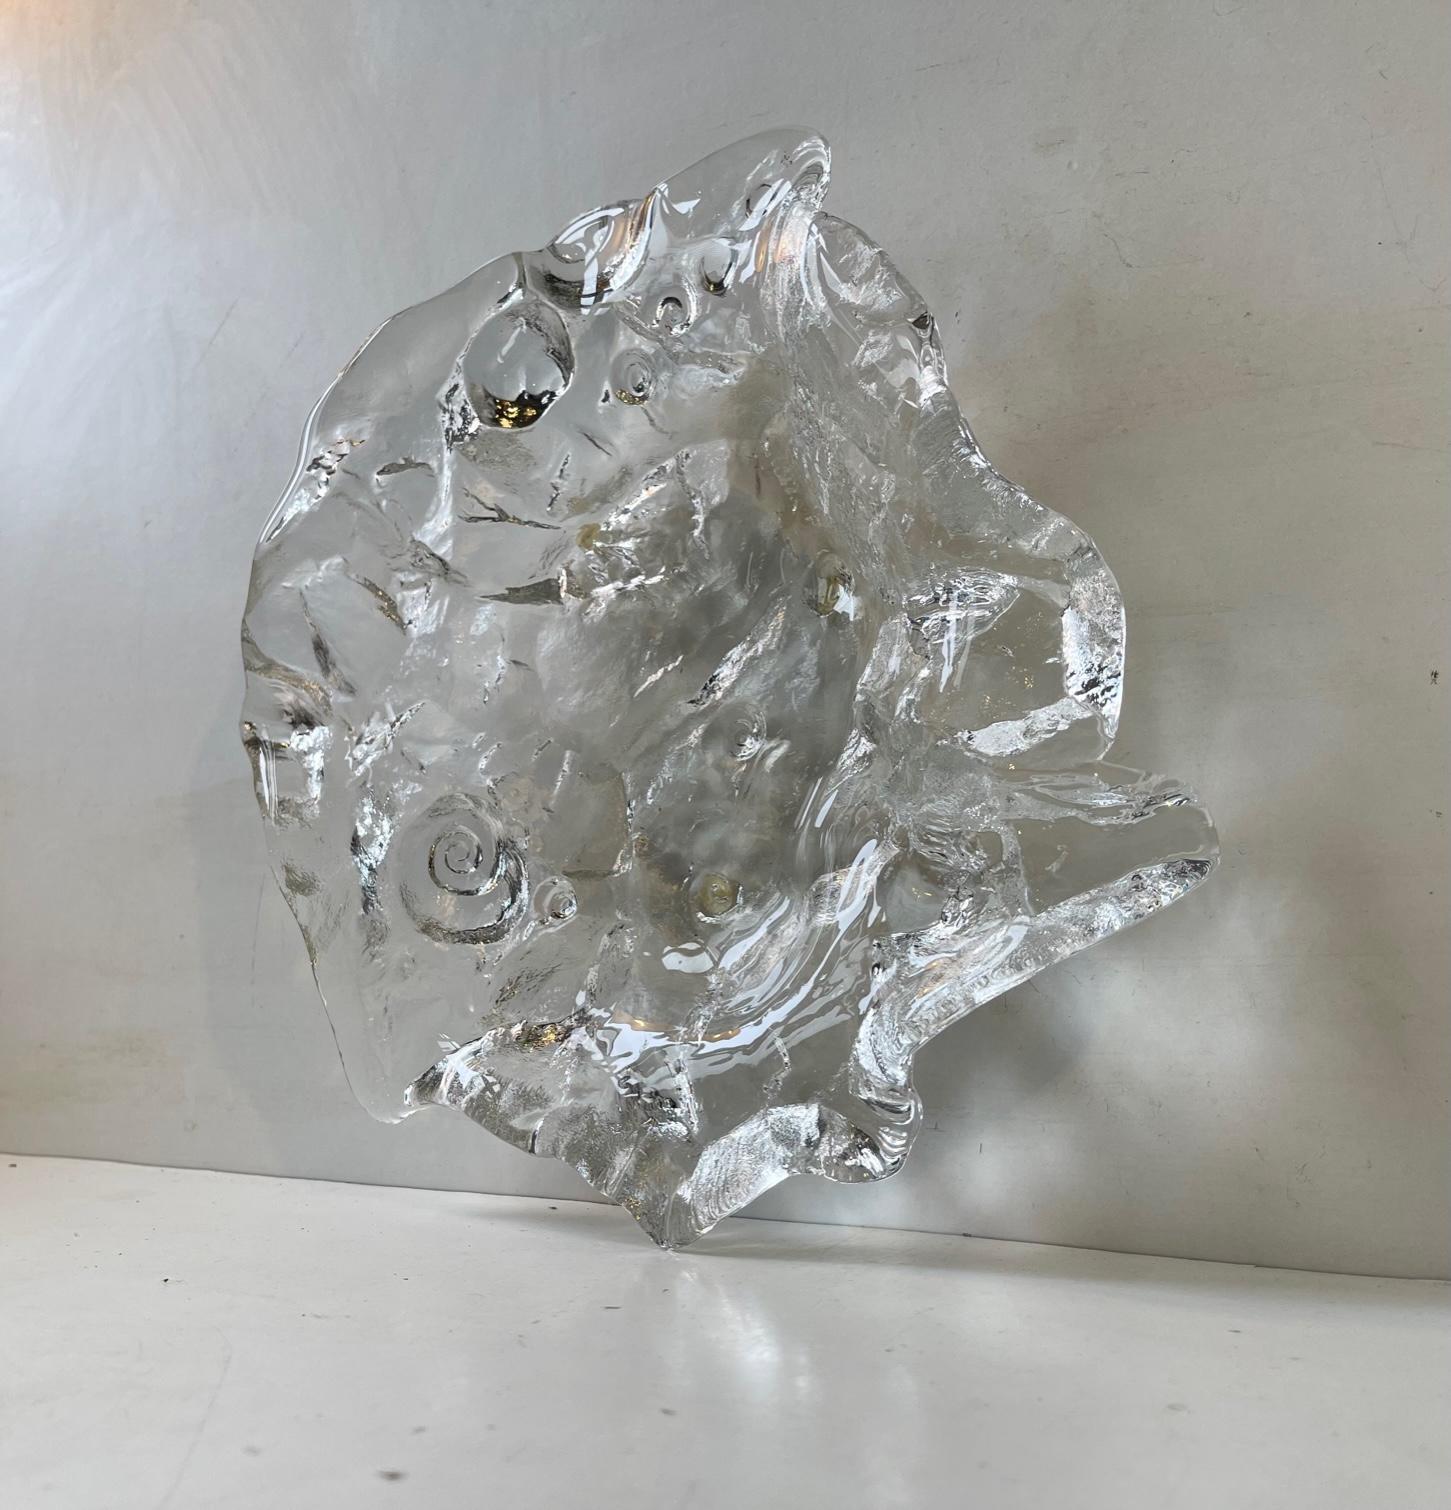 From certain angles it looks like a face in profile. But this heavy stock freeform dish or centerpiece bowl actually mimics ice with incapsulated shells. Designed and made by Pukeberg in Sweden circa 1970 in a style reminiscent of René Lalique.